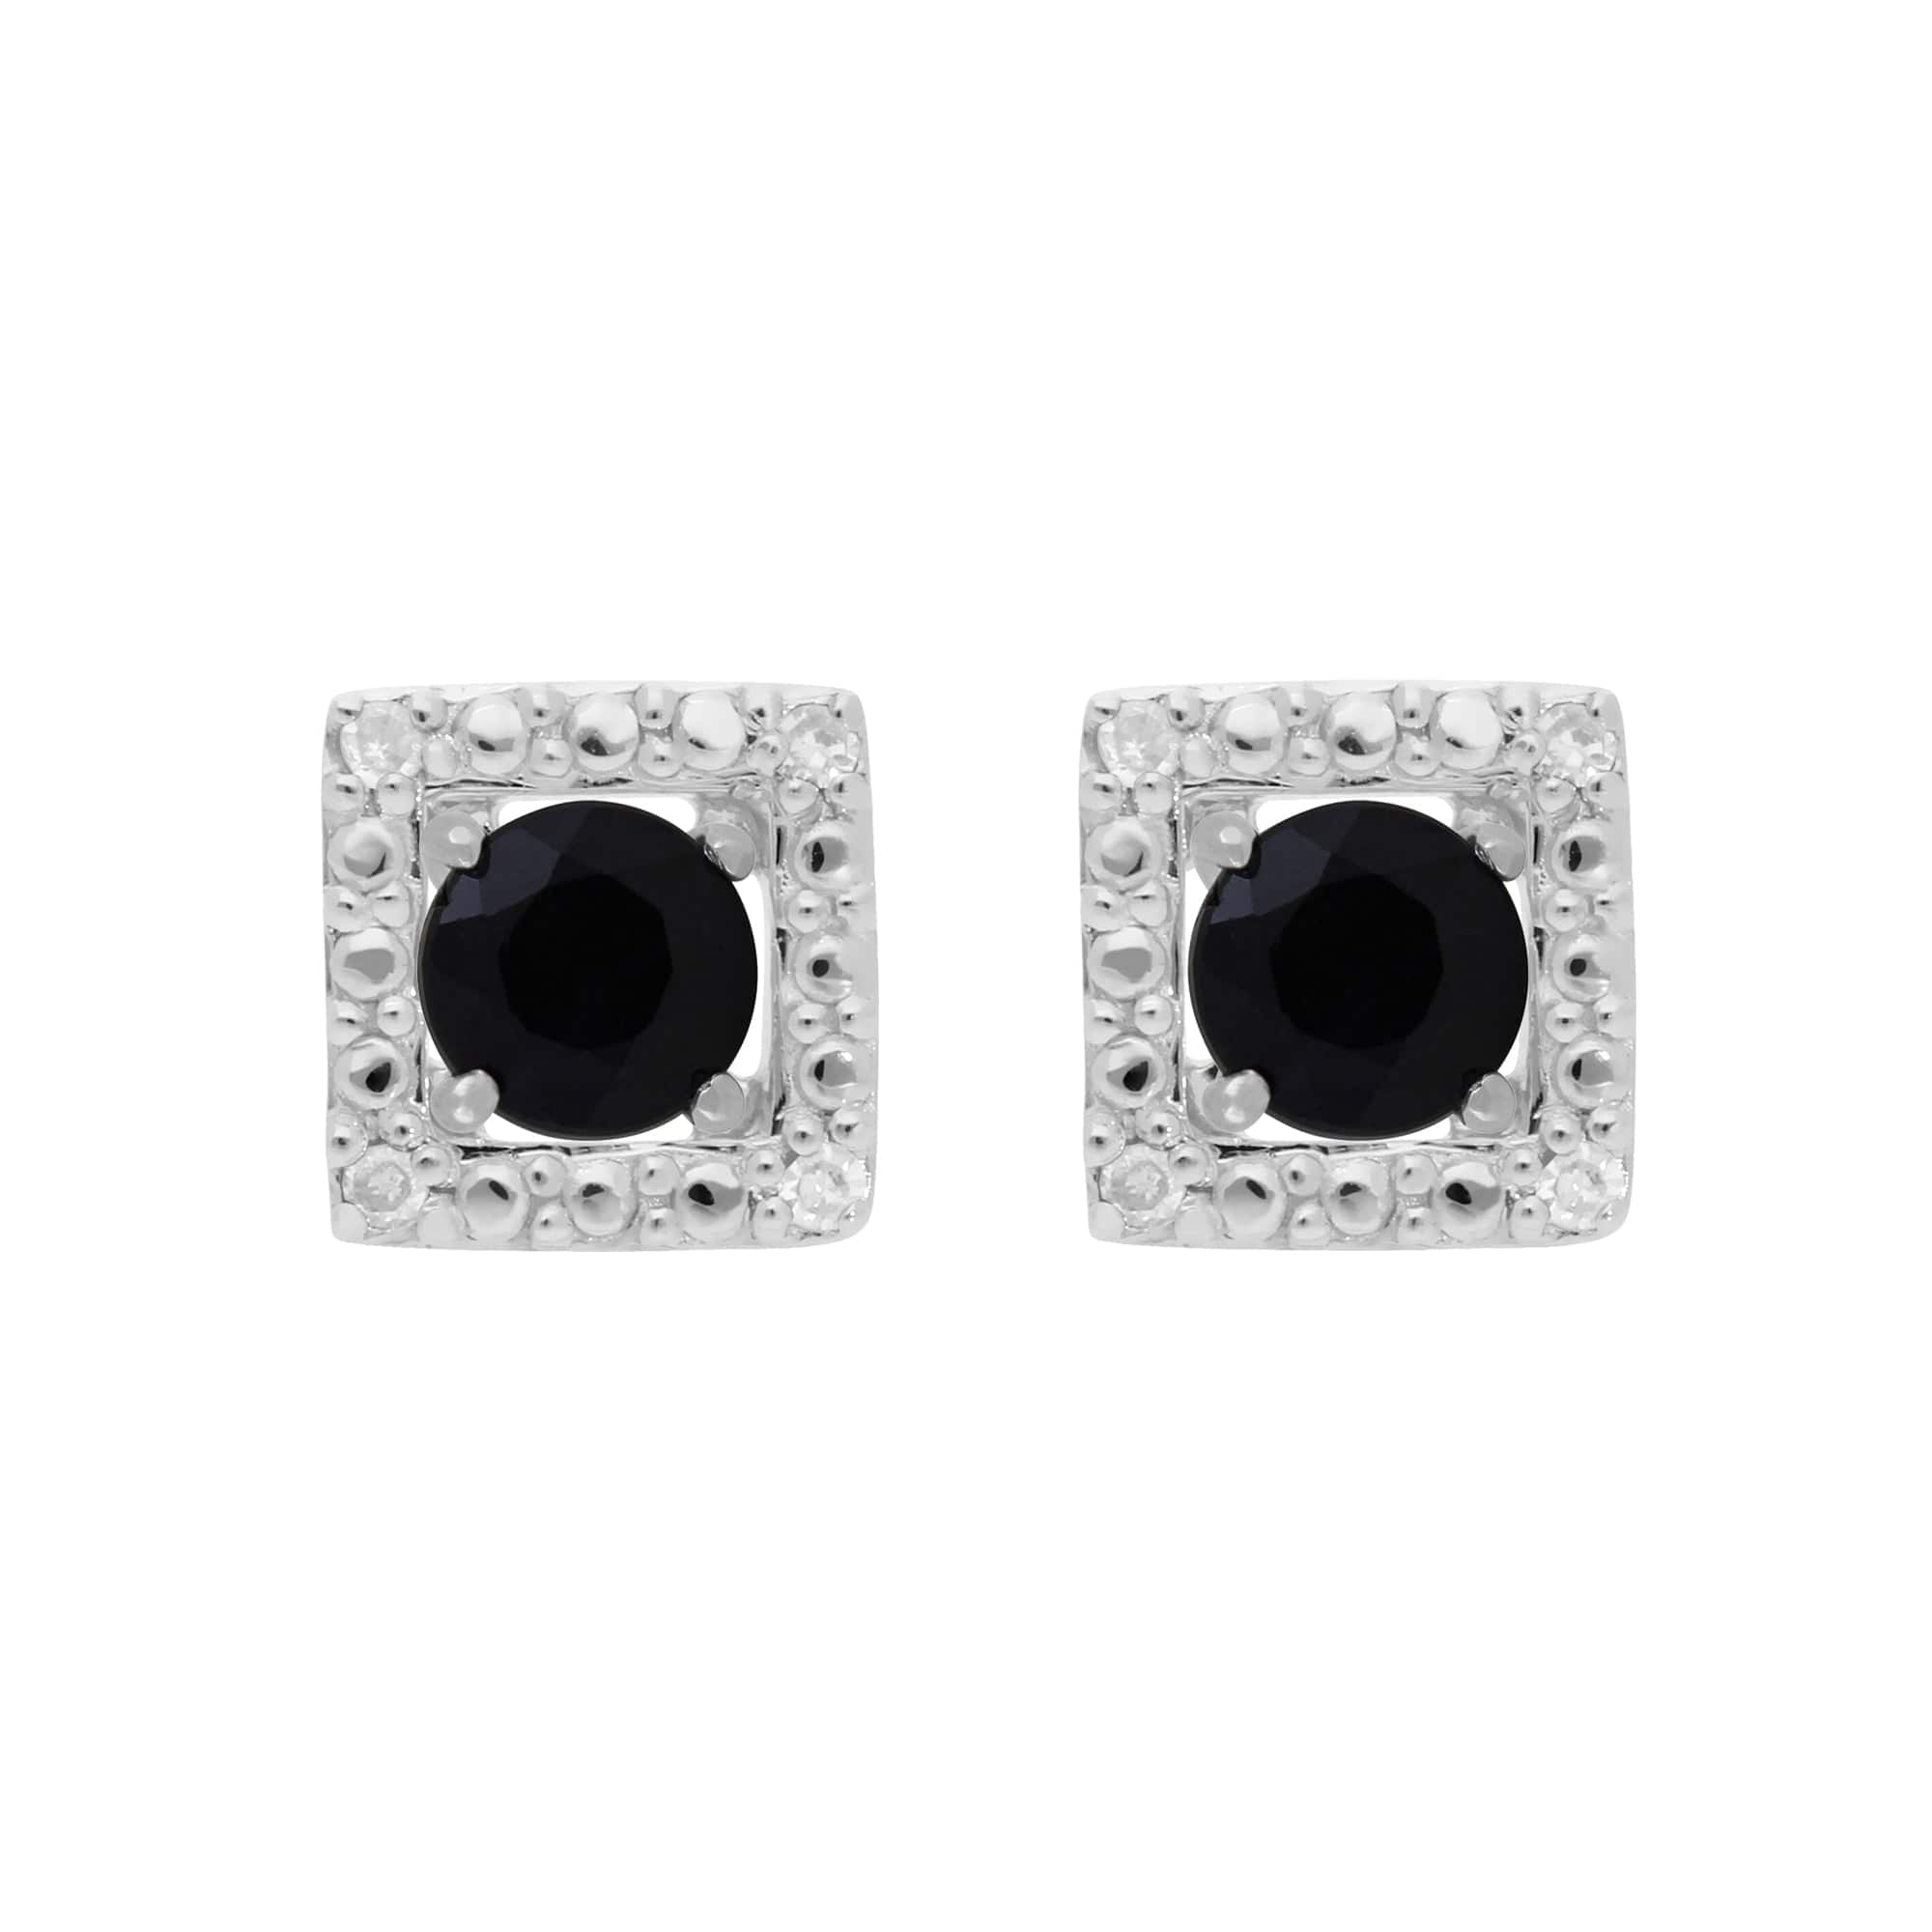 25167-162E0245019 Classic Round Dark Blue Sapphire Studs with Detachable Diamond Square Ear Jacket in 9ct White Gold 1